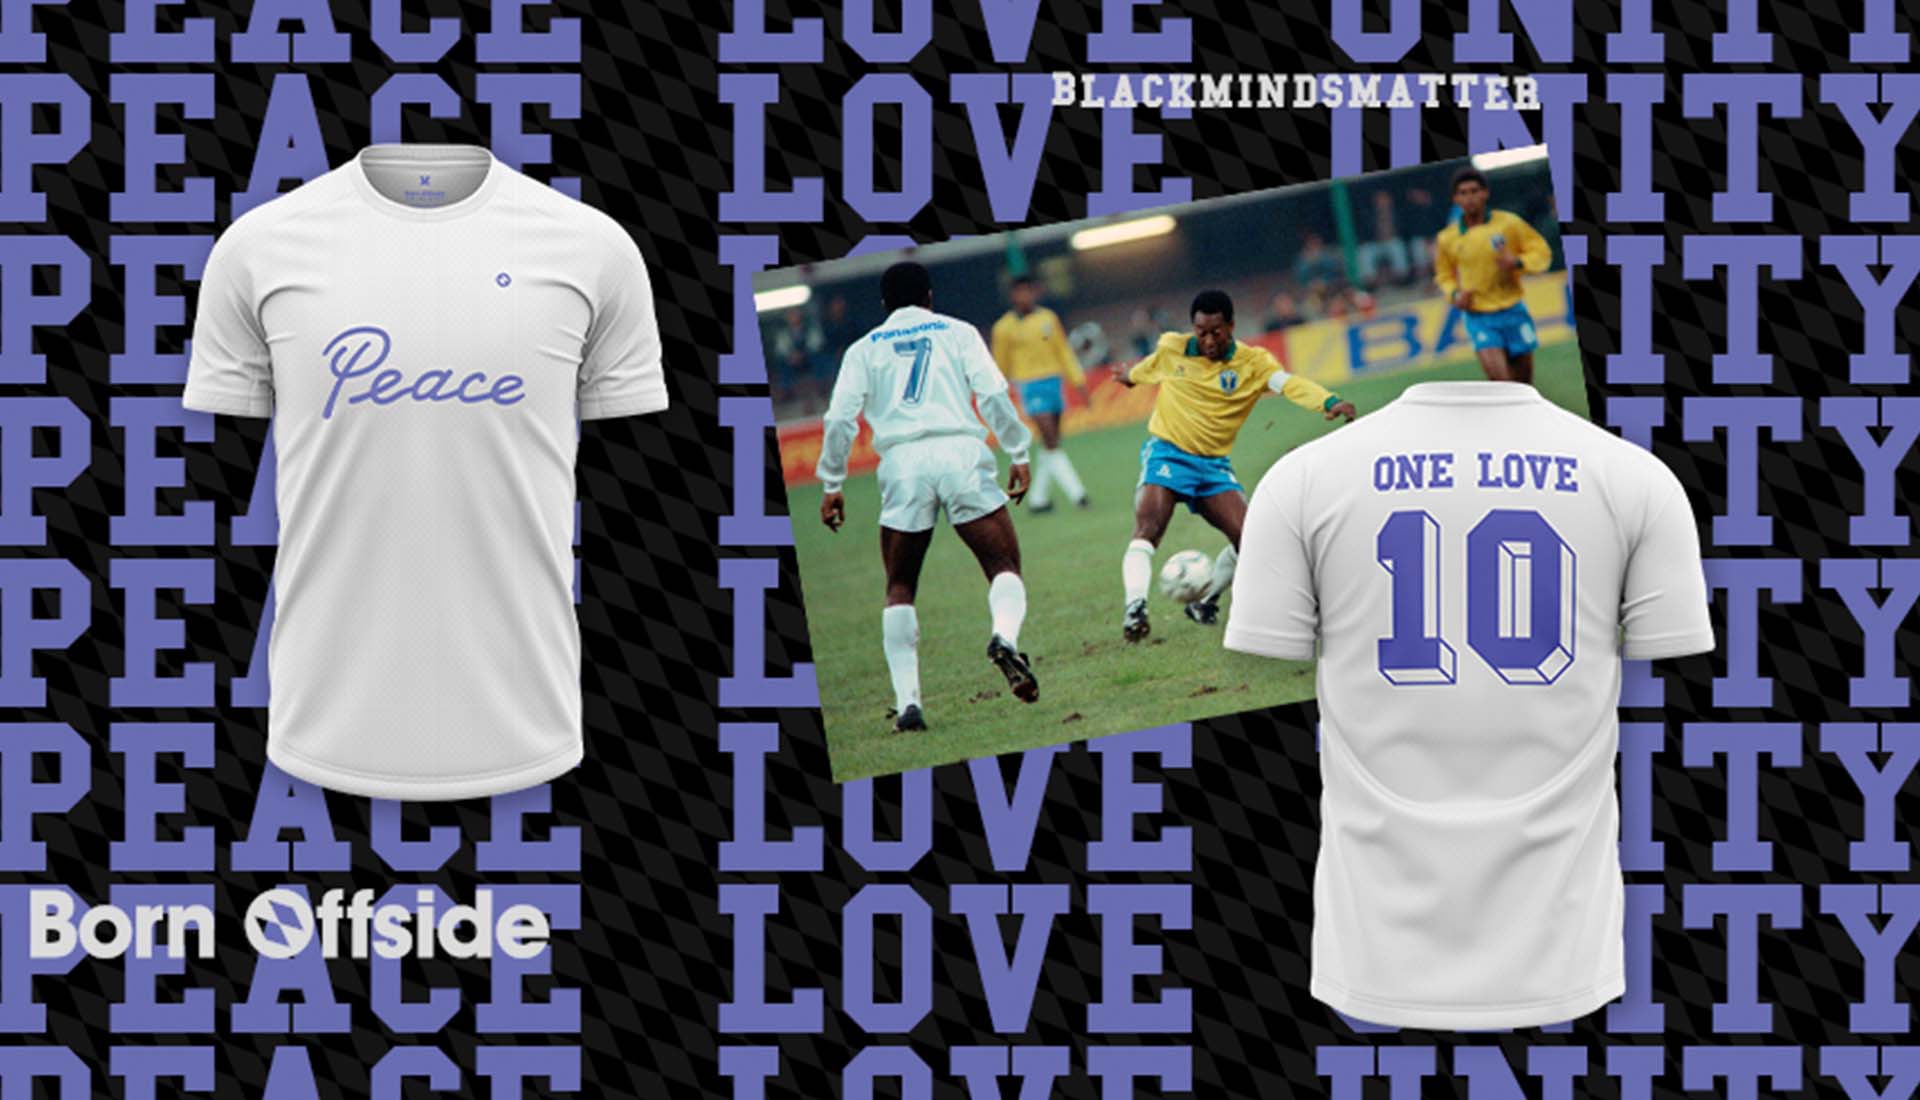 adidas Brasil Produce Special Shirts For 3 Teams For Black Consciousness  Month - SoccerBible